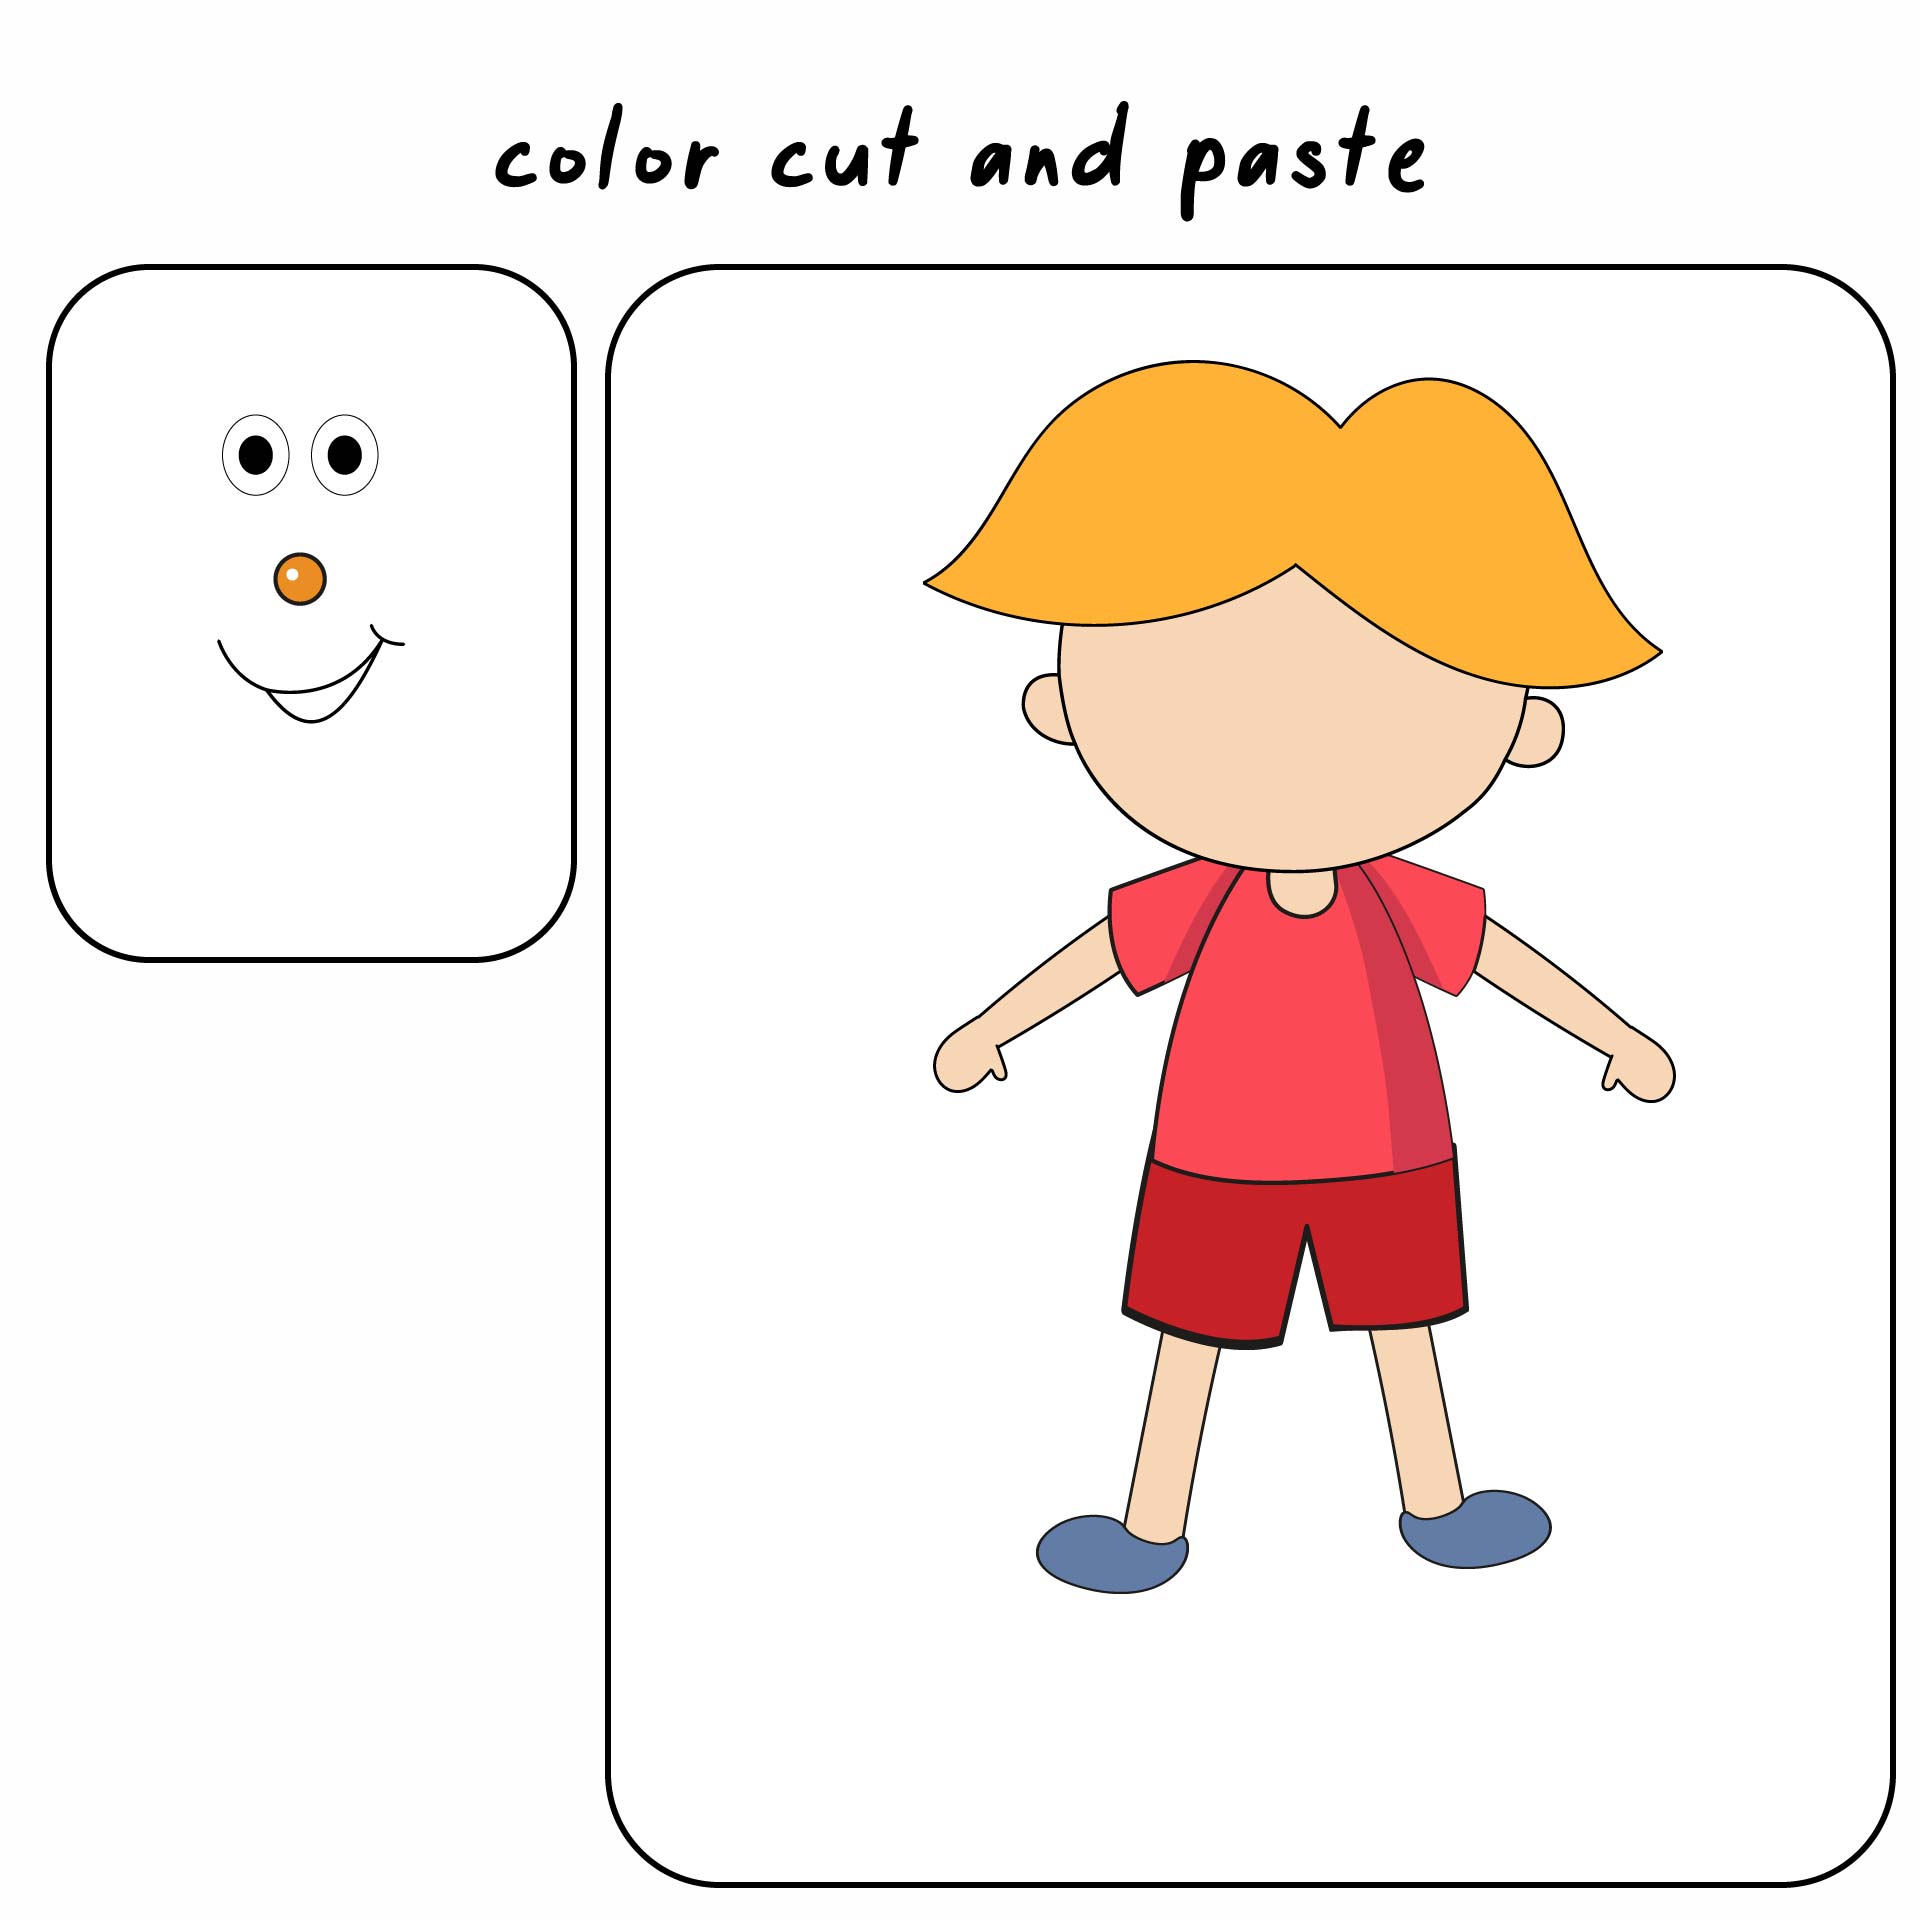 9 Best Images of Cut And Paste Printables Spring Cut and Paste Worksheet, Free Cut and Paste